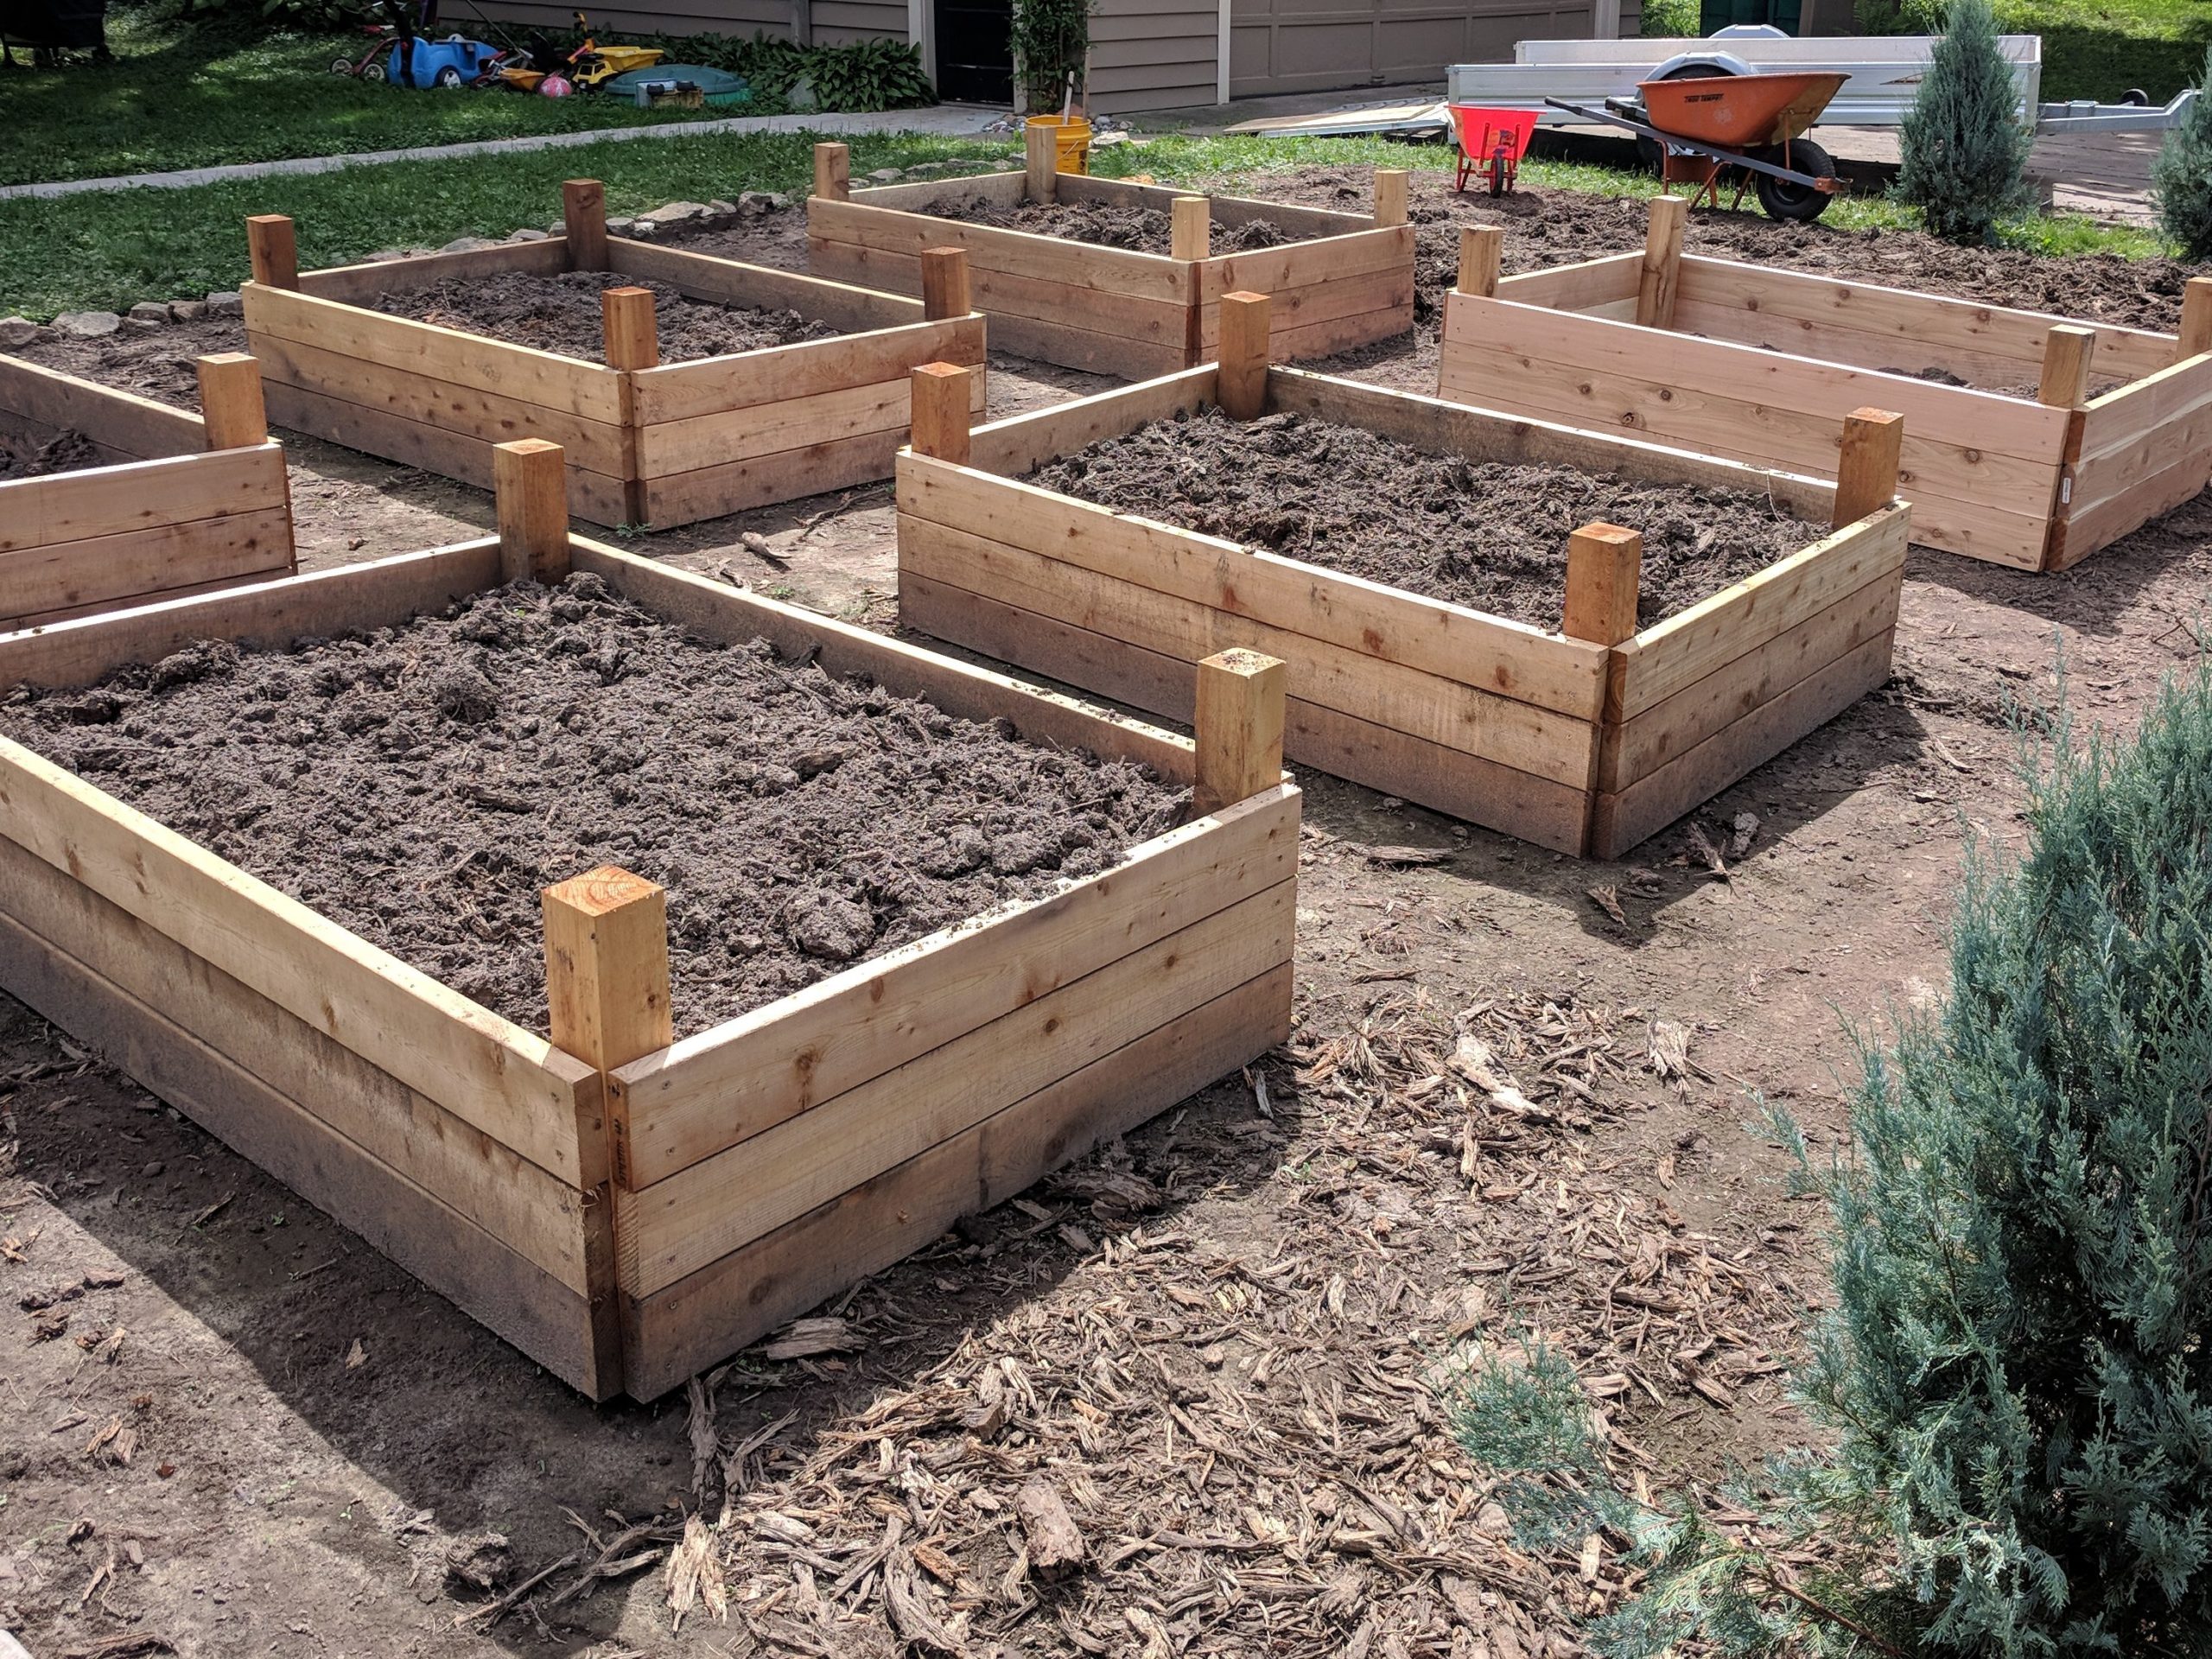 Process of building raised bed gardens.